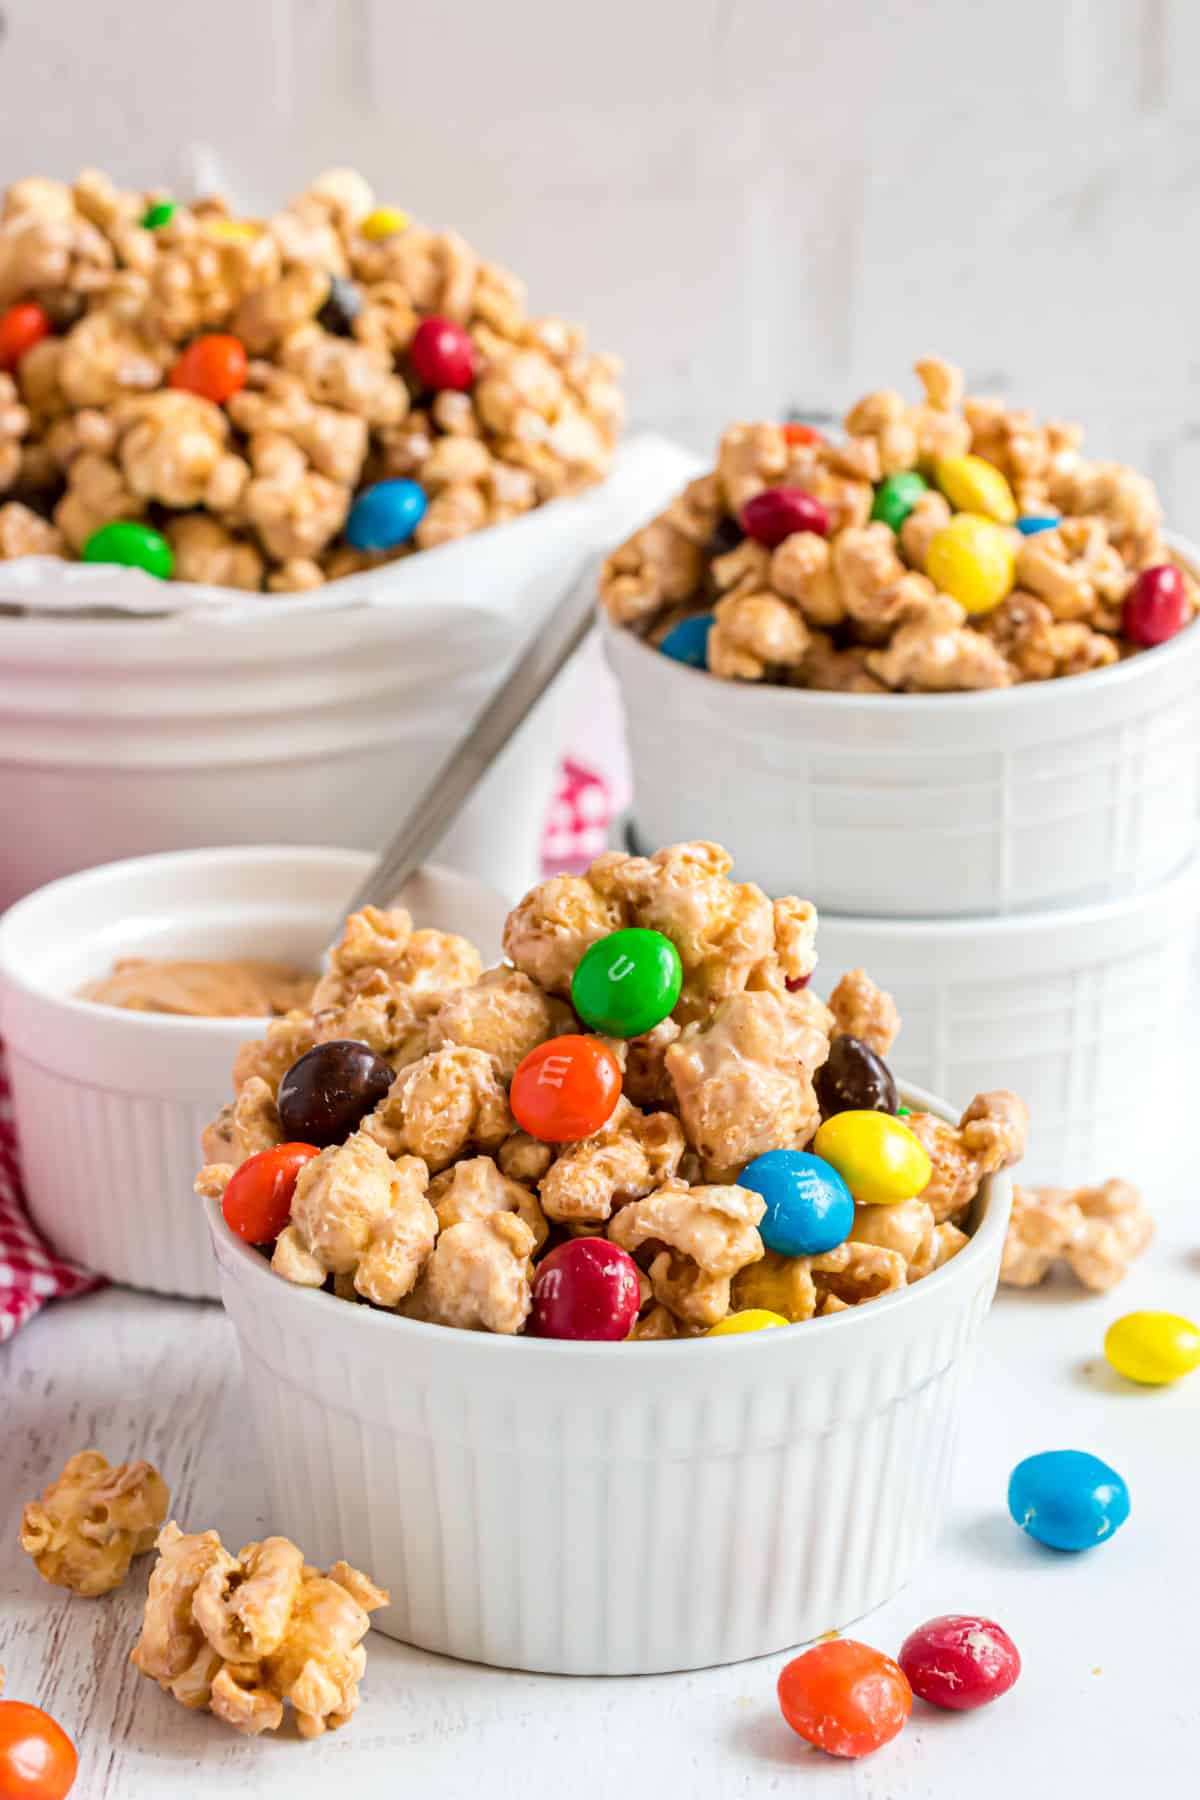 Peanut butter popcorn in a white serving bowls.